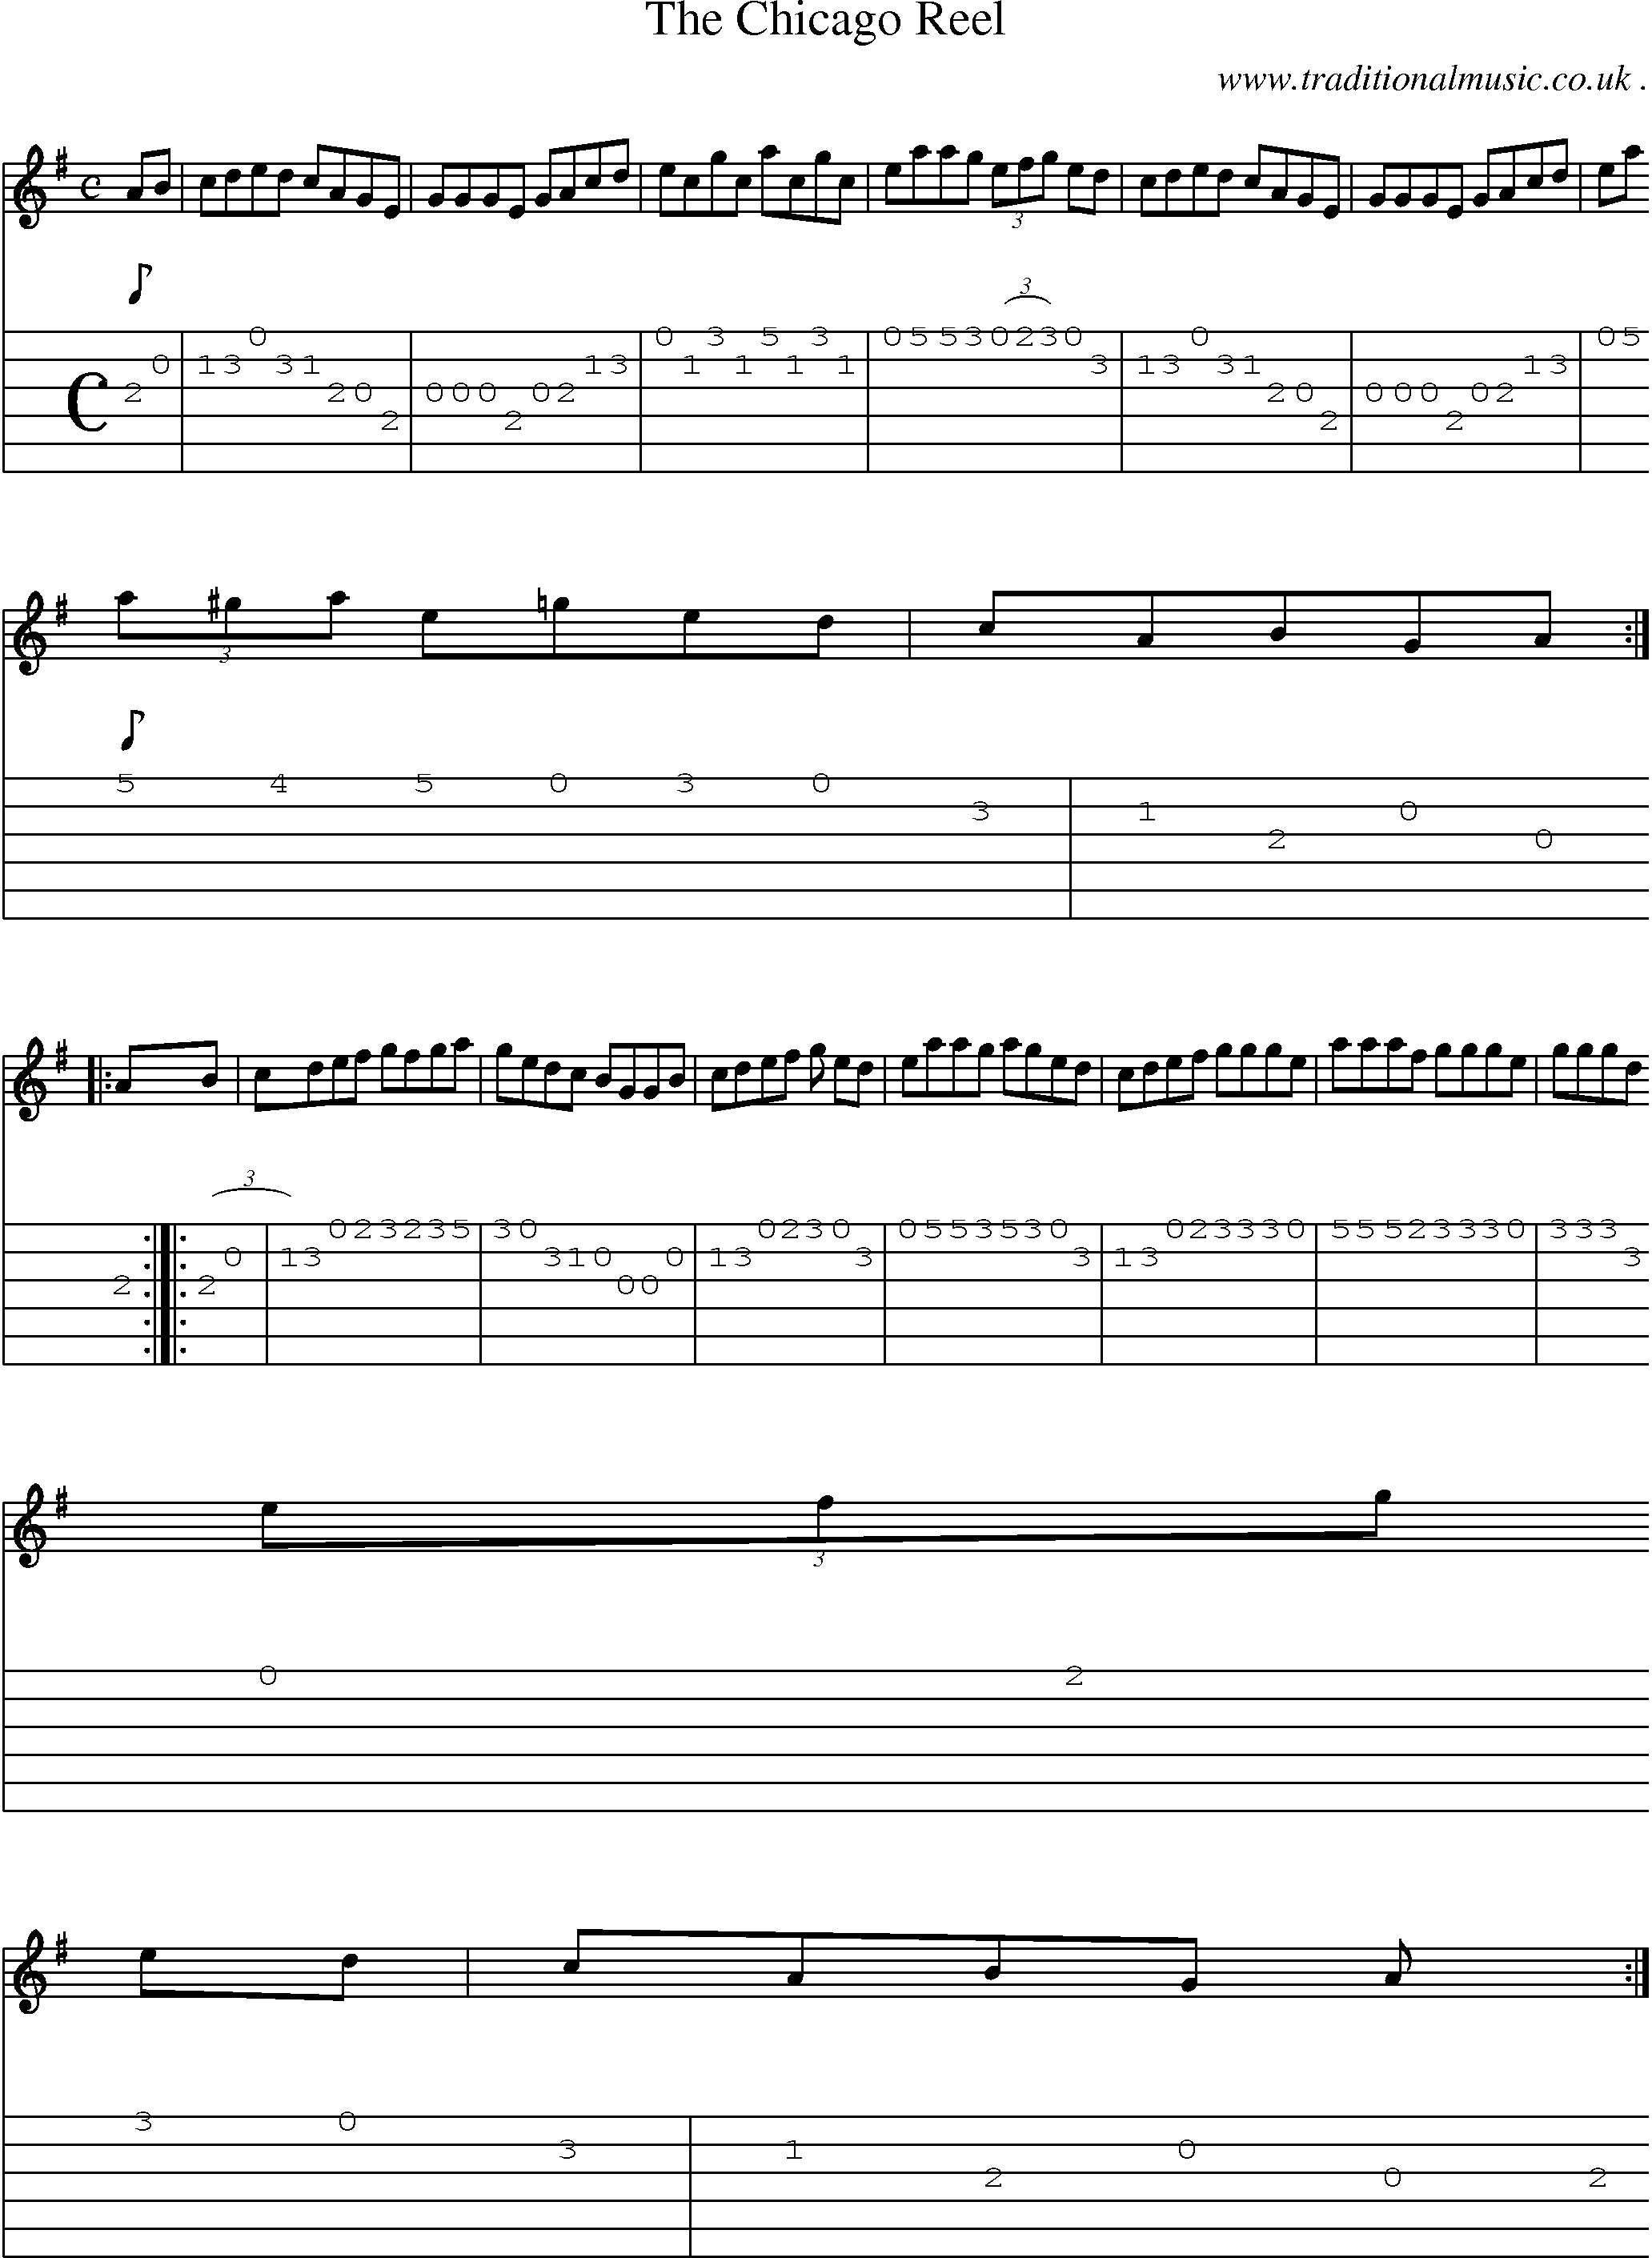 Sheet-Music and Guitar Tabs for The Chicago Reel